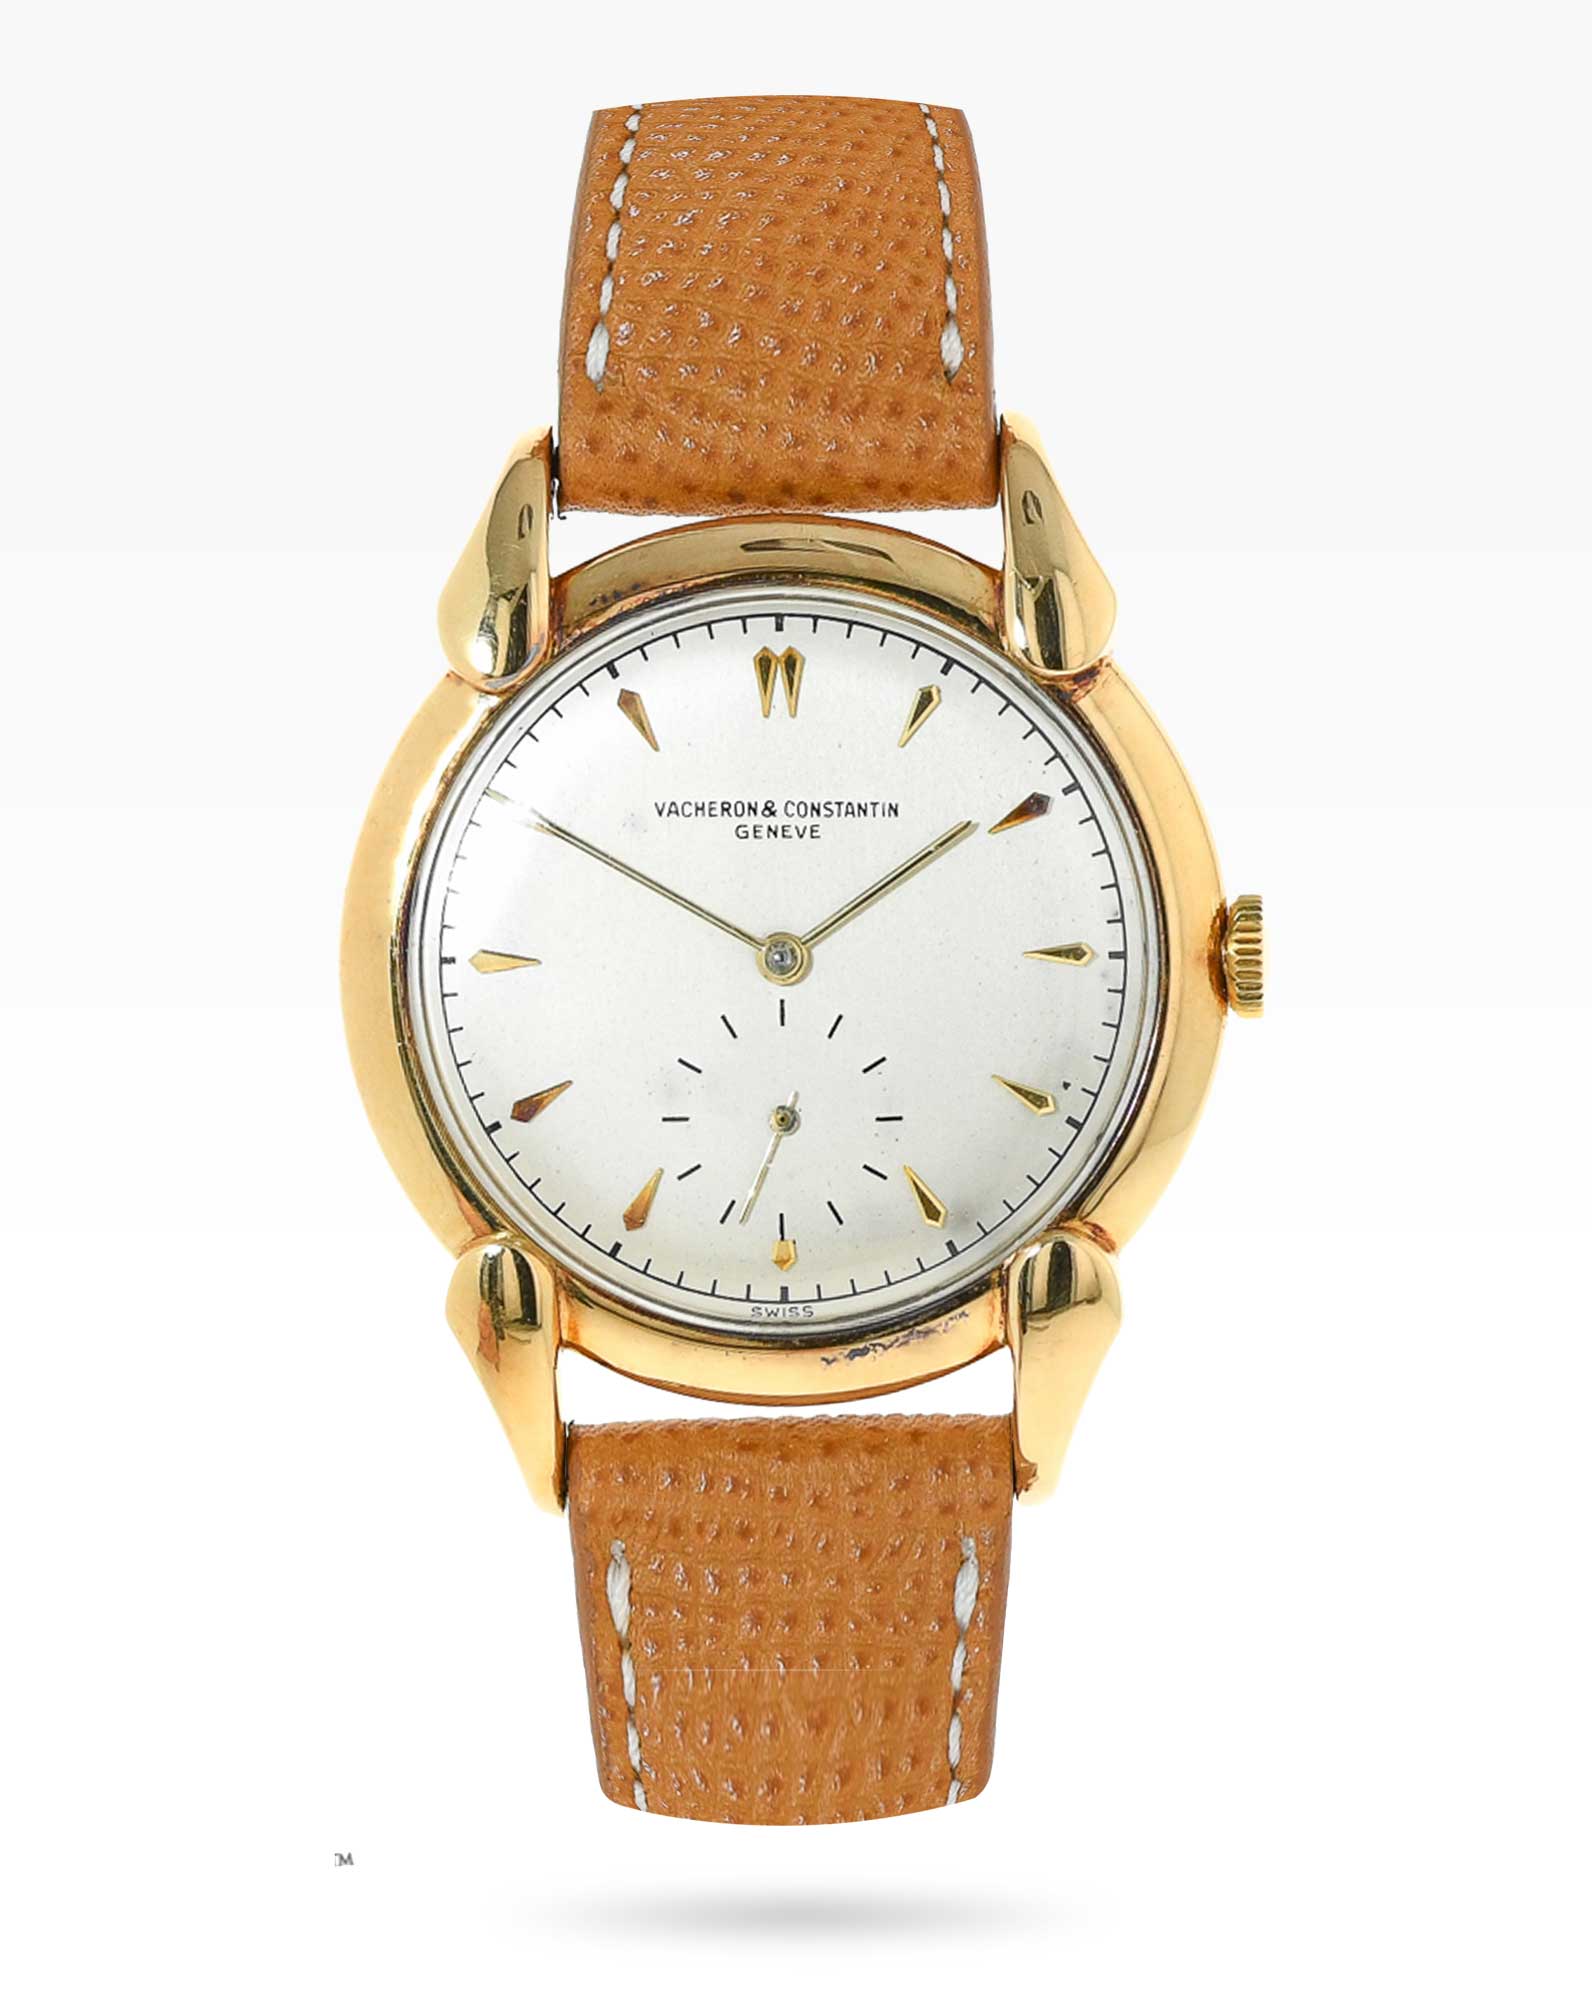 vacheron Constantin 38mm oversized dresswatch with overhanding spider lugs from the 1960s - 2ToneVintage Watches